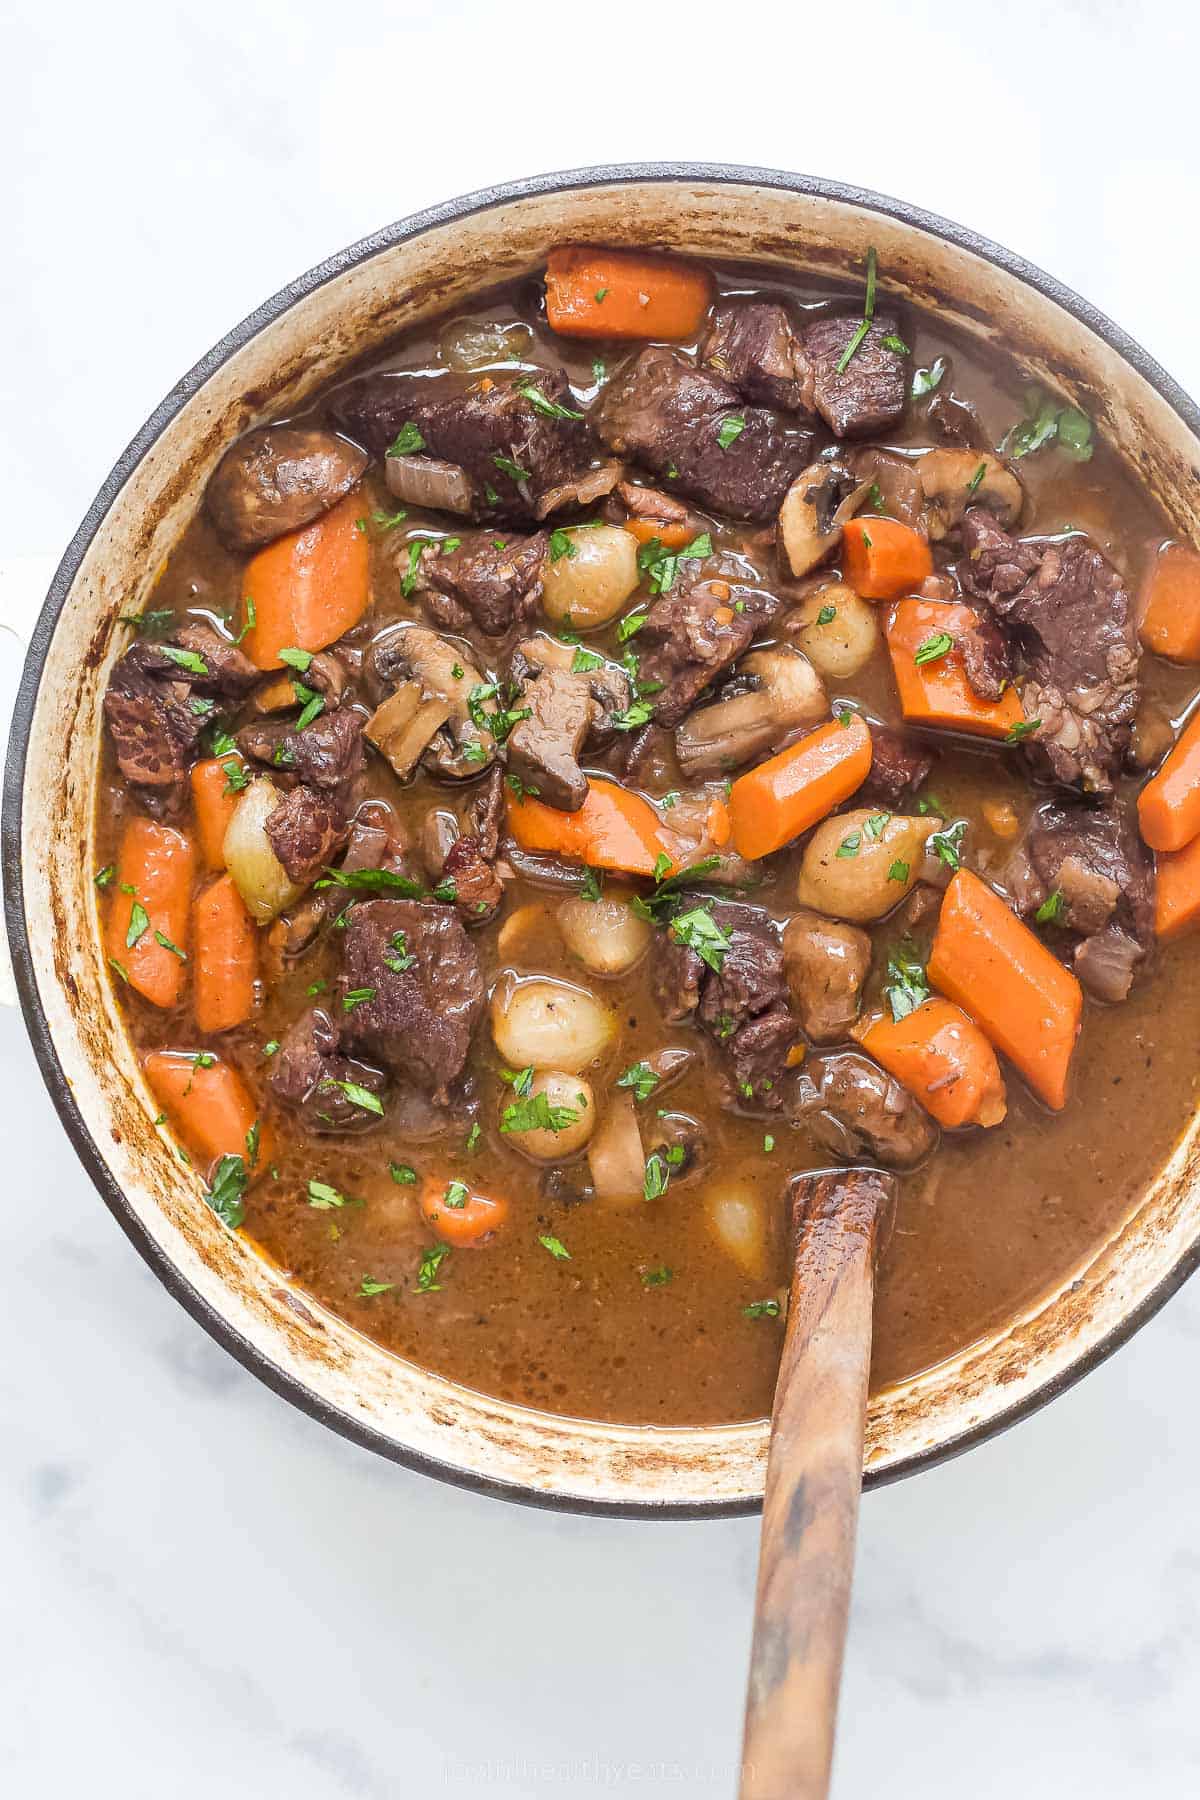 a pot of beef bourguignon with carrots, pearl onions, and mushrooms in a dark gravy